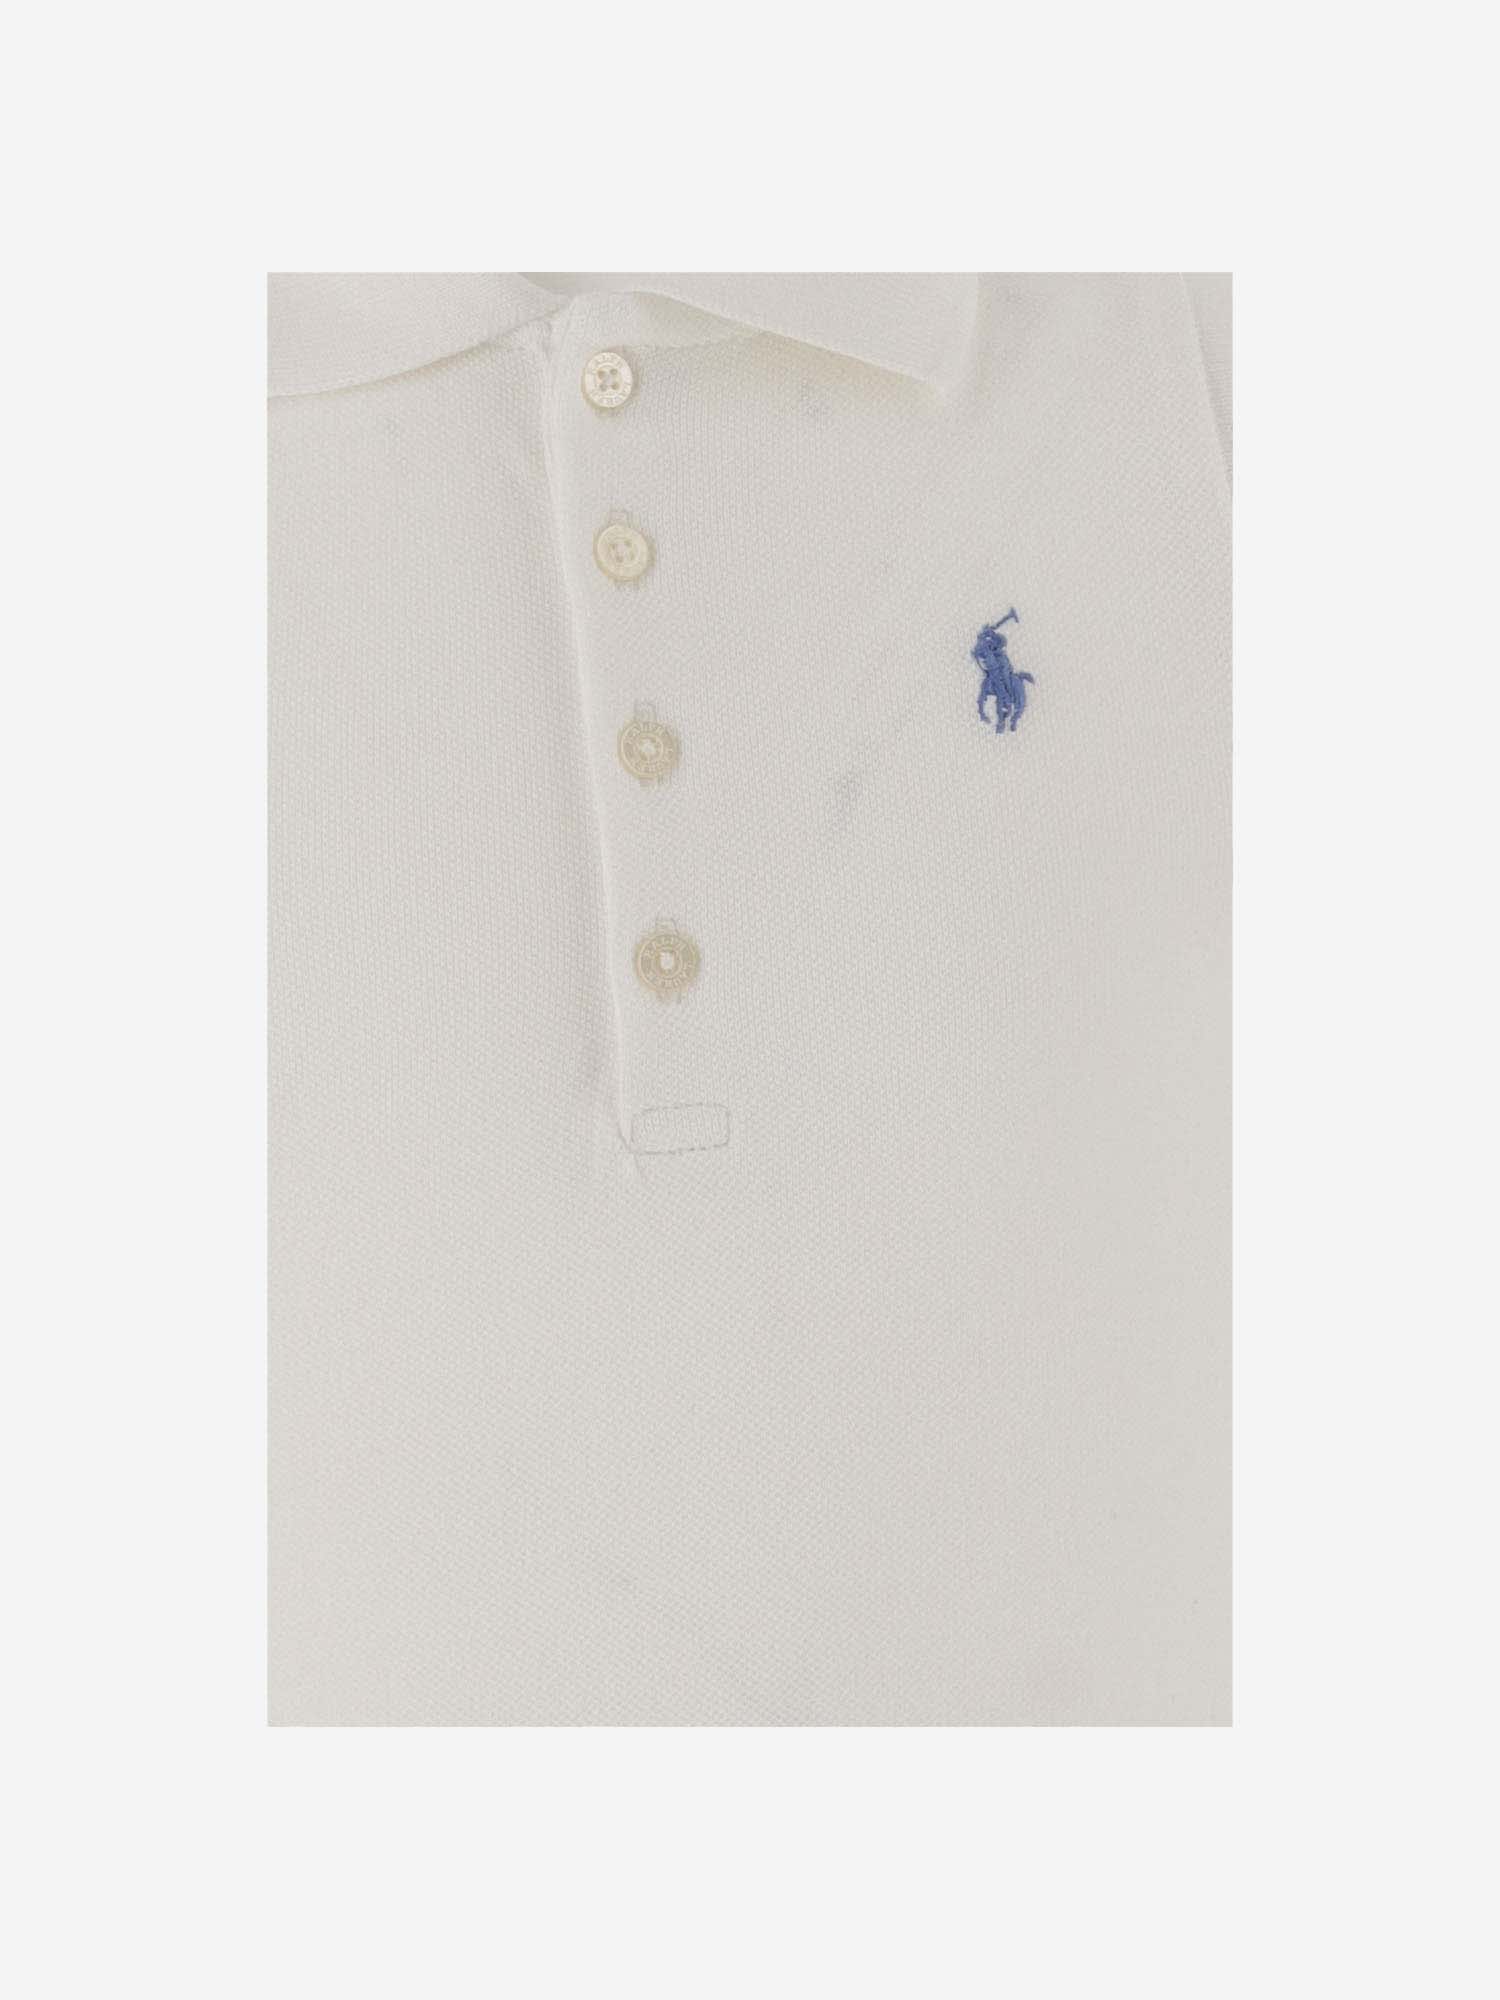 Shop Polo Ralph Lauren Stretch Cotton Dress With Logo In White